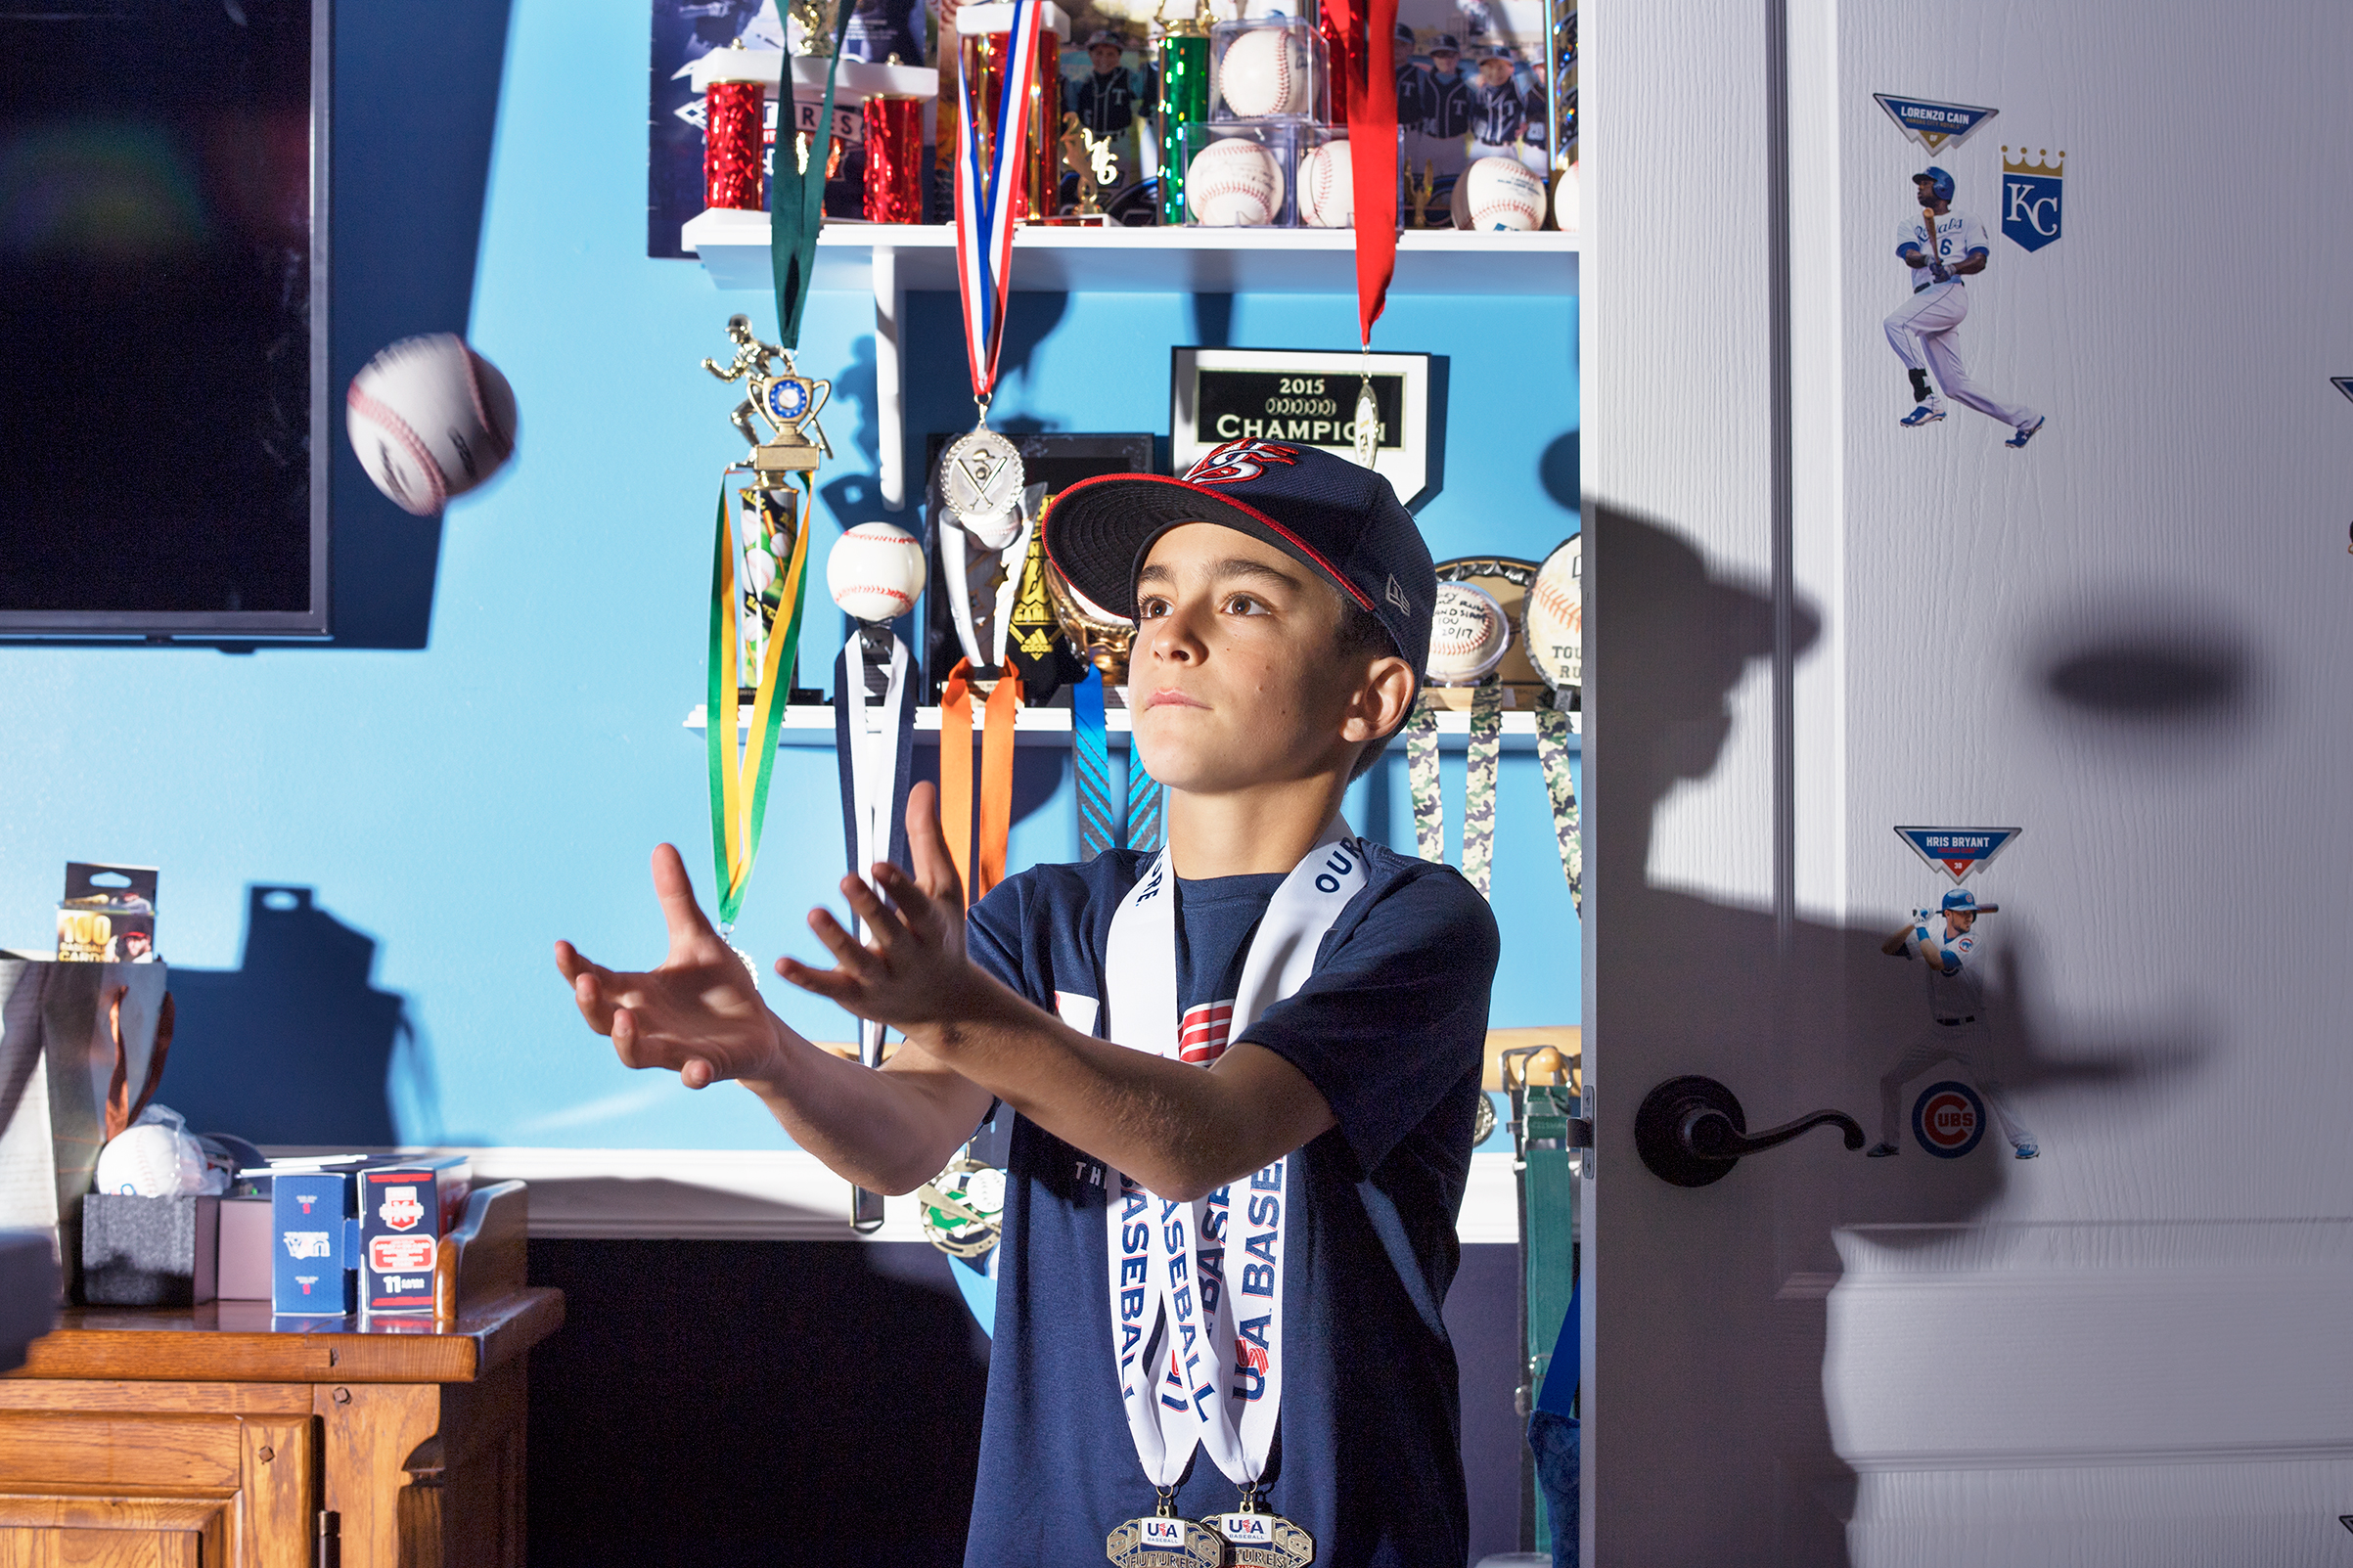 “I love working hard,” says Joey Erace, 10, who lives in southern New Jersey but has suited up for baseball teams based in California and Texas. His Instagram account  @joeybaseball12 has more than 24,000 followers. (Finlay MacKay for TIME)